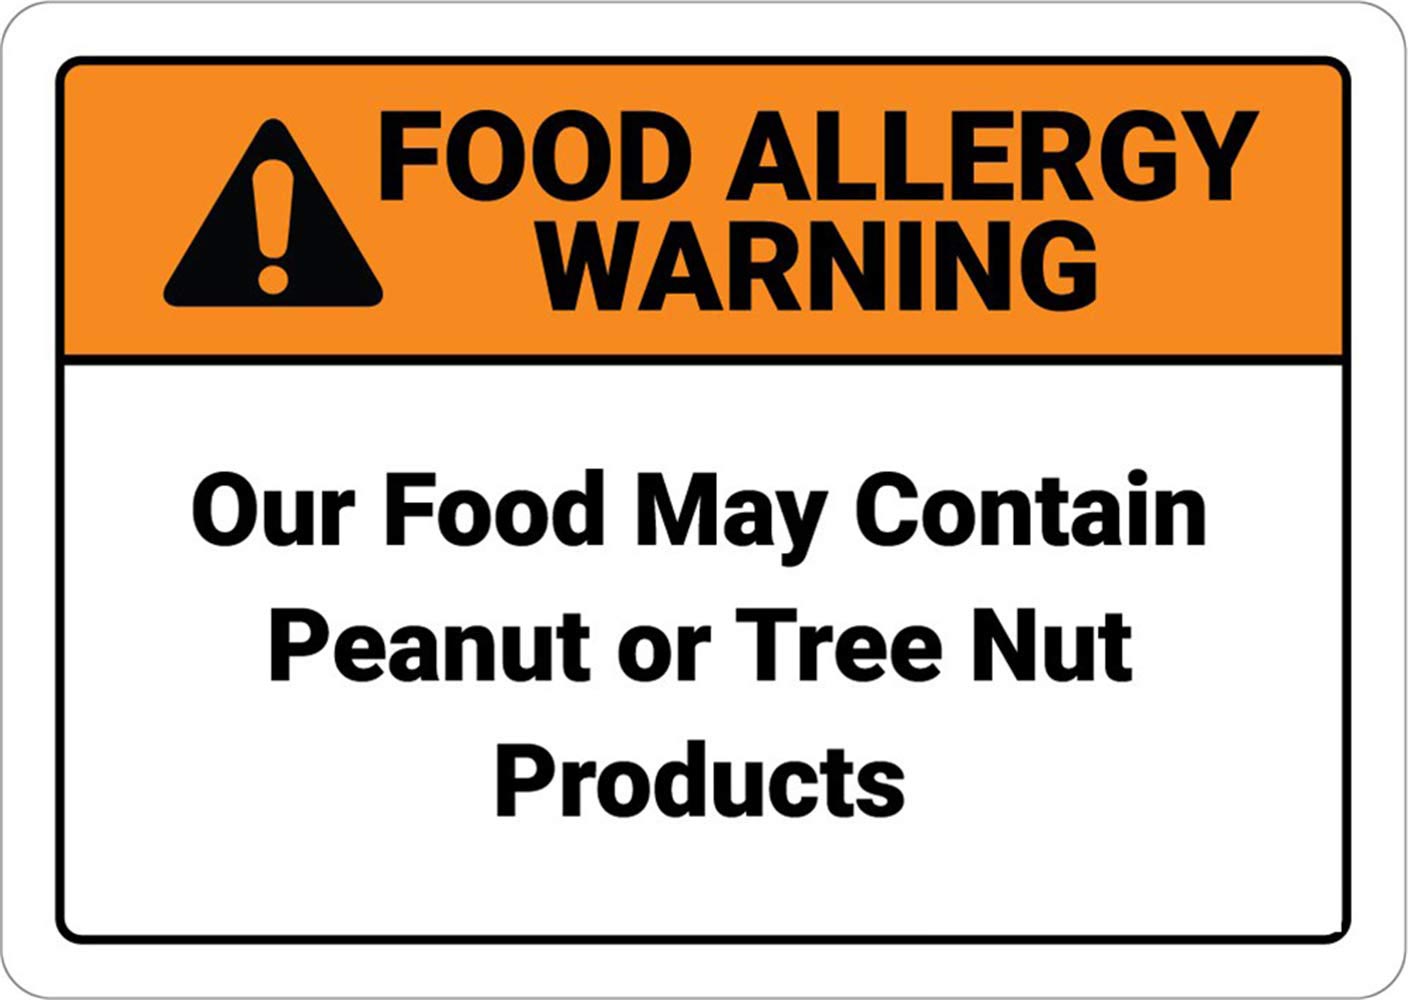 Food Allergy Warnings - Our Food May Contain Peanut or Tree Nut Products